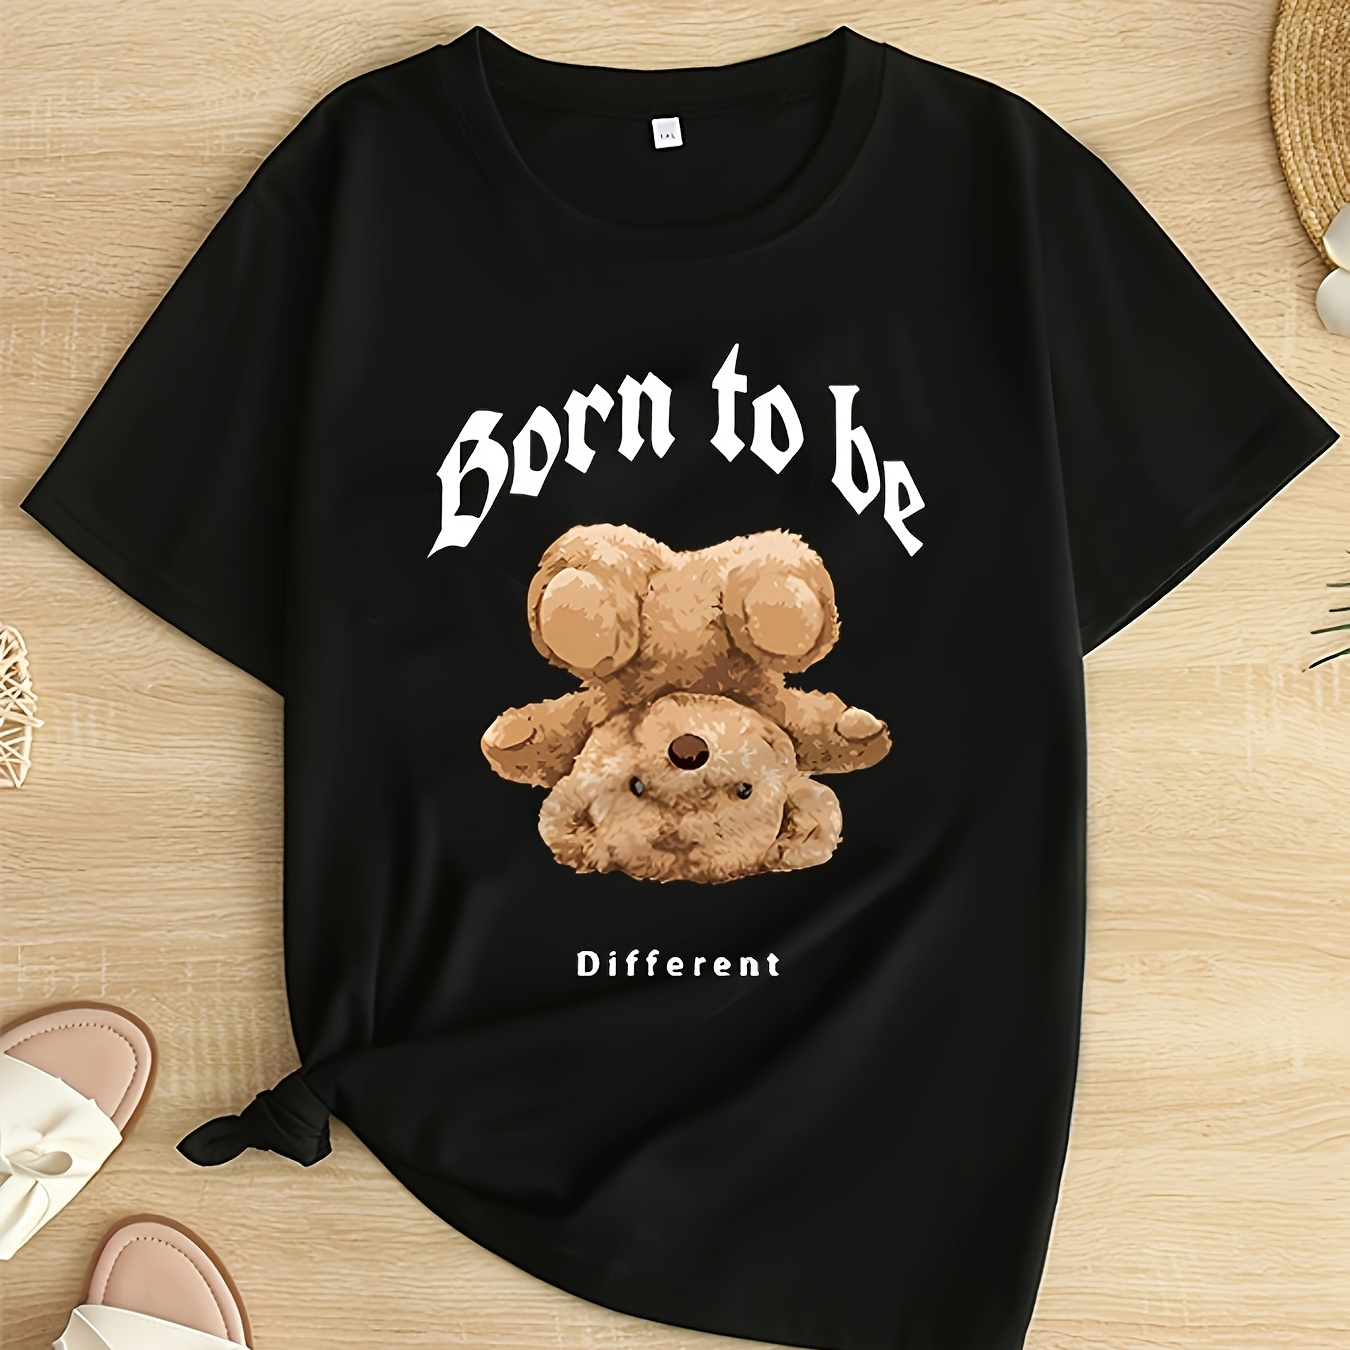 

Plus Size Bear & Letter Print T-shirt, Casual Short Sleeve Top For Spring & Summer, Women's Plus Size Clothing